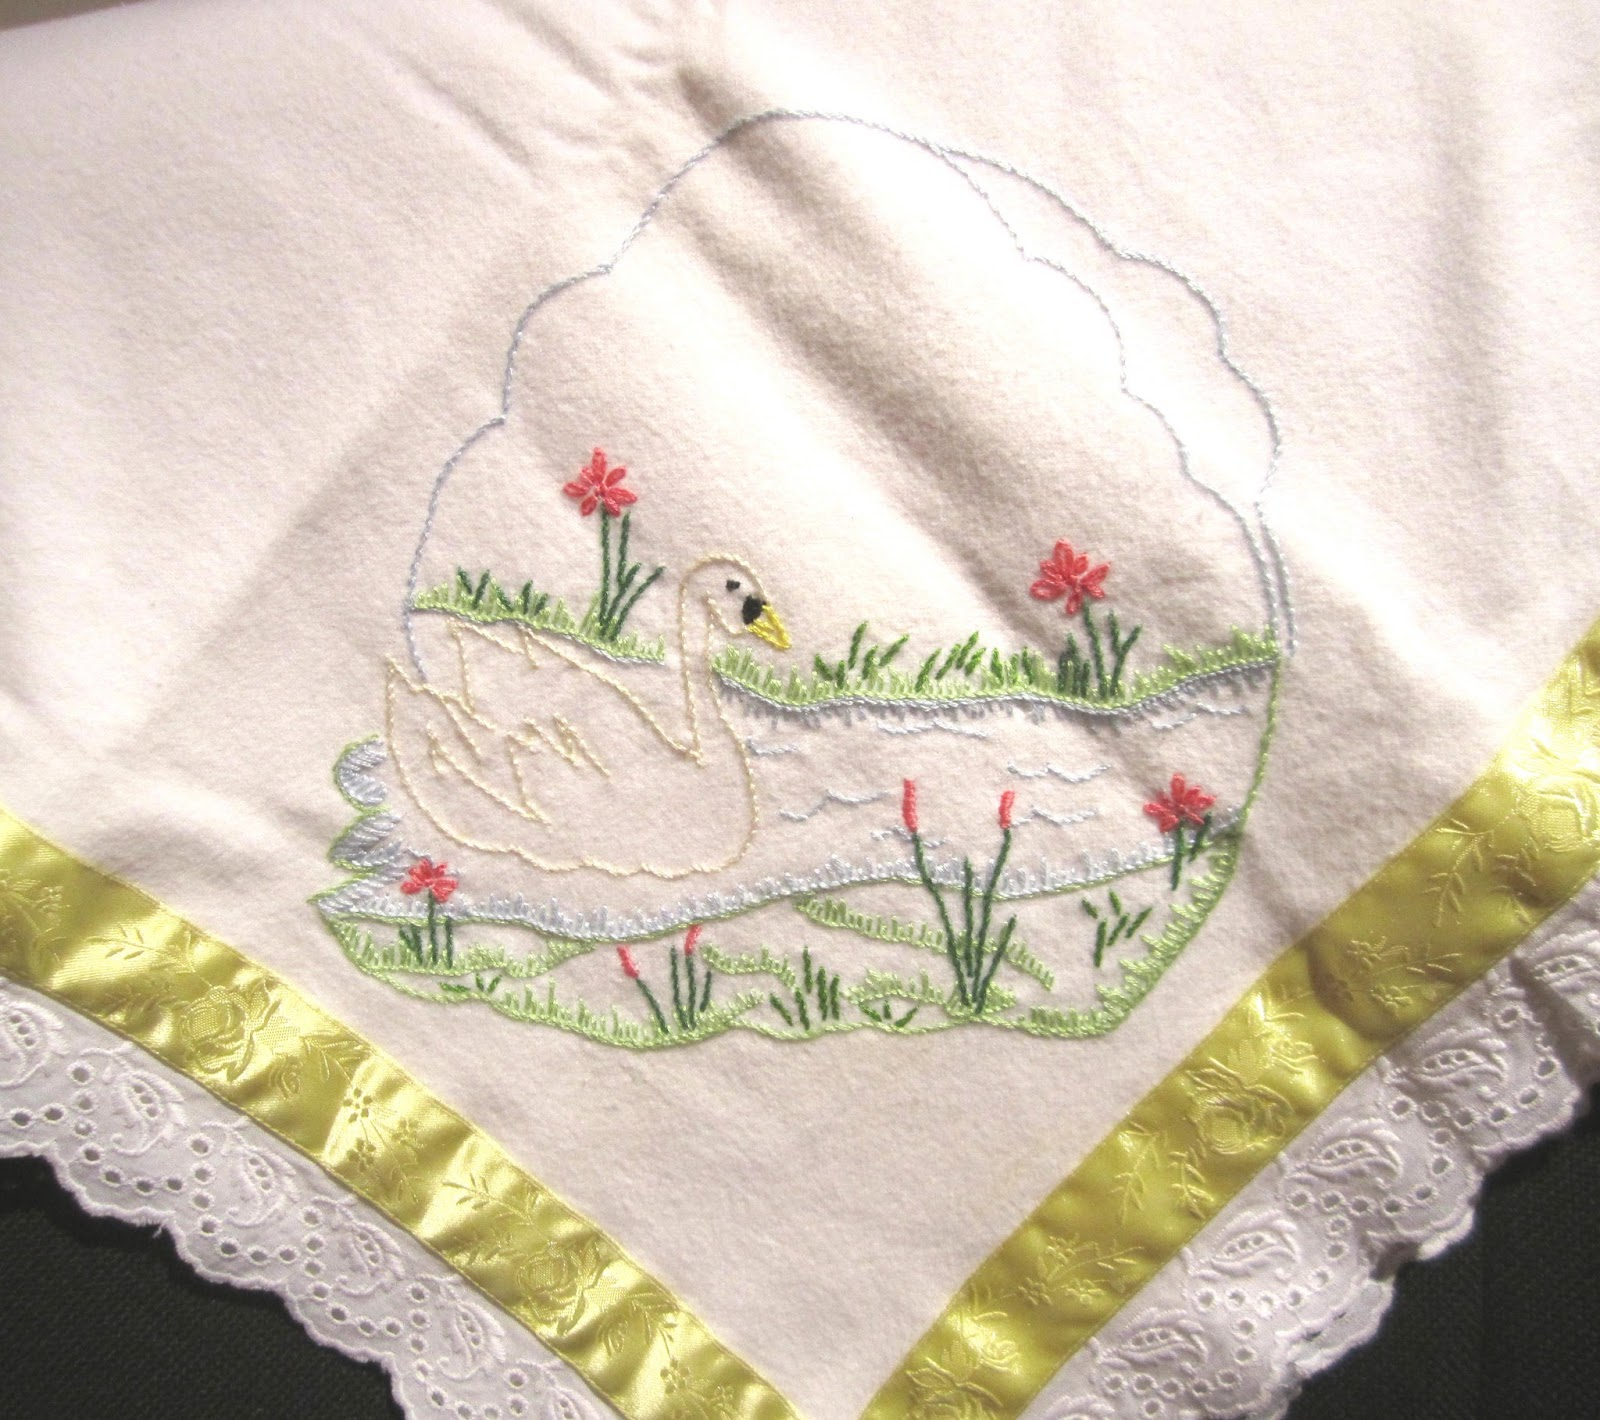 Hand Embroidery Patterns For Baby Quilts Gumleaf Stitch Designs Embroidery Machine Vs Hand